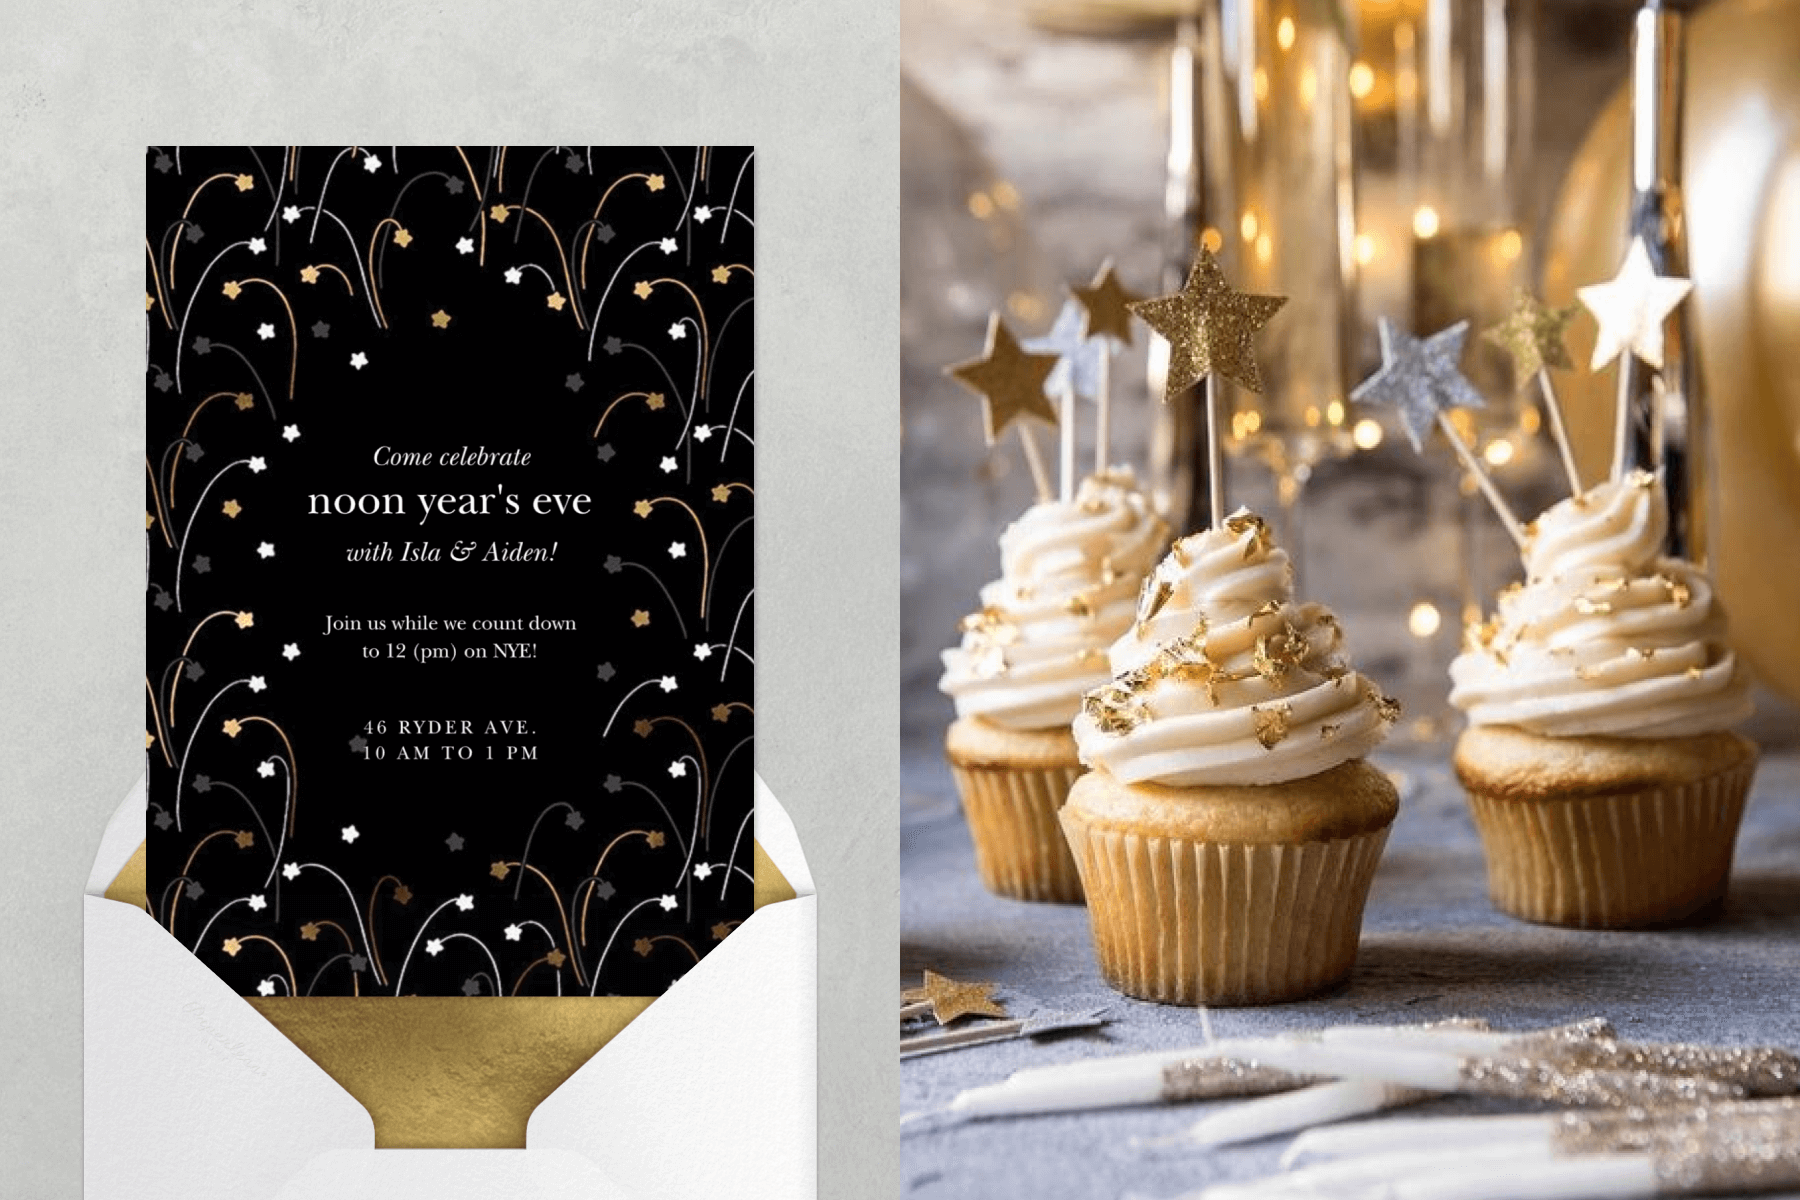 A black invitation with gold and silver stars on stems, resembling flowers; cupcakes with gold foil and metallic star toppers.